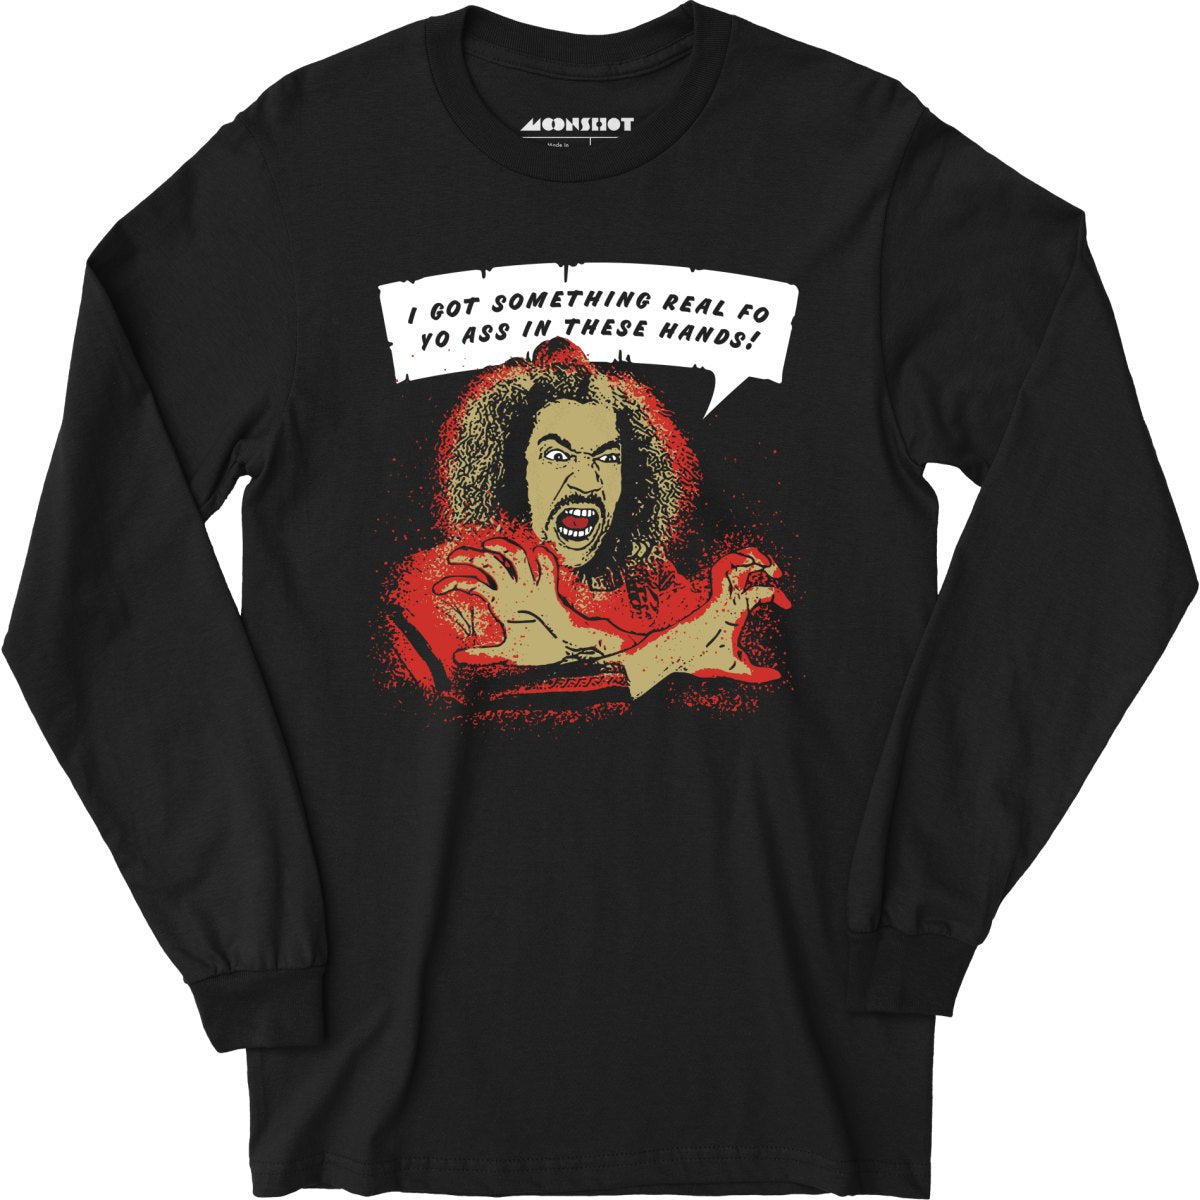 Shonuff - I Got Something Real Fo Yo Ass in These Hands - Long Sleeve T-Shirt